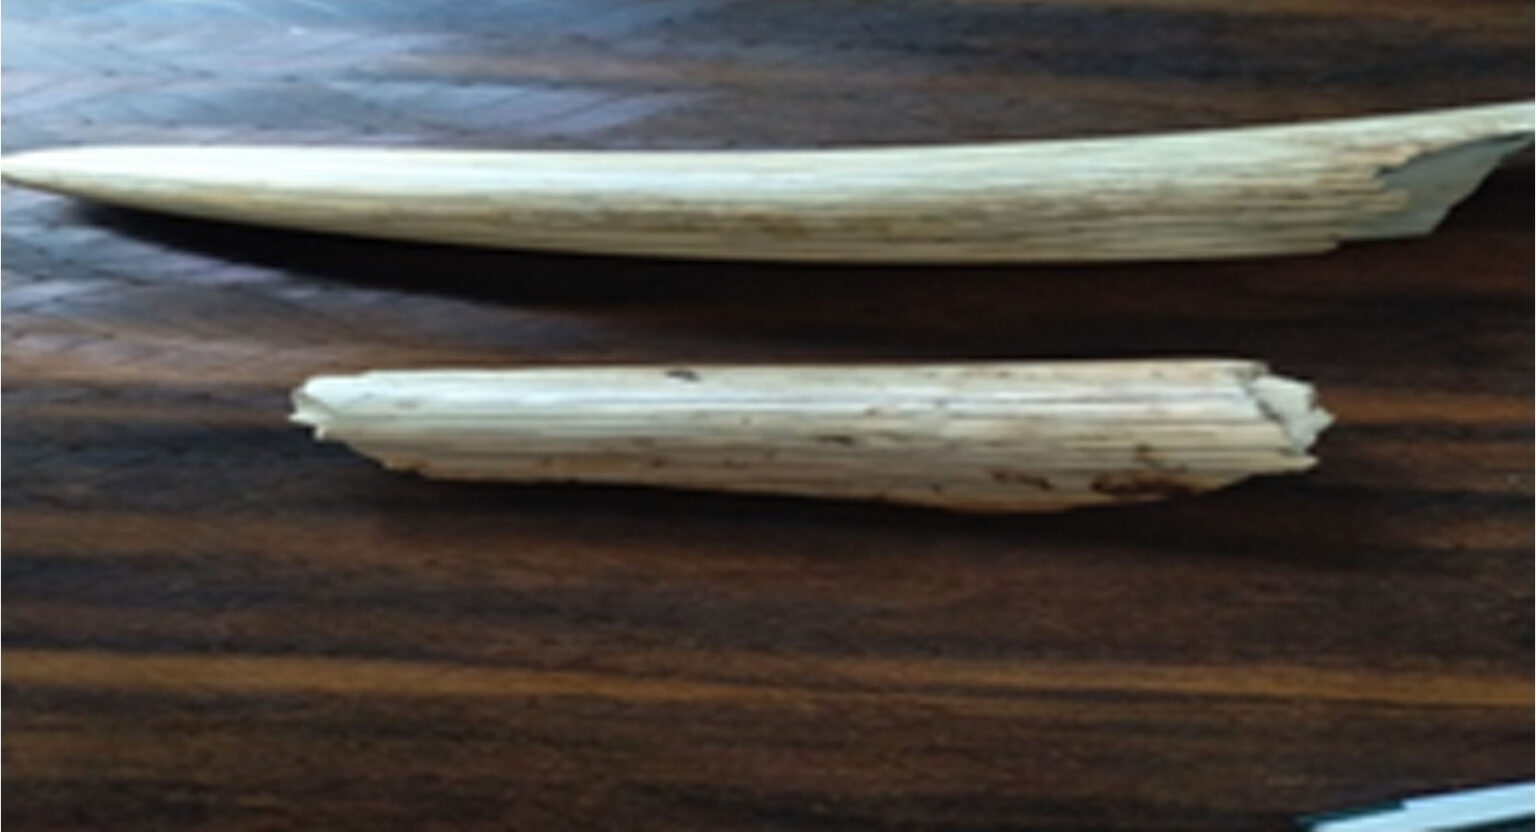 Three arrested with ivory tusks in Banke